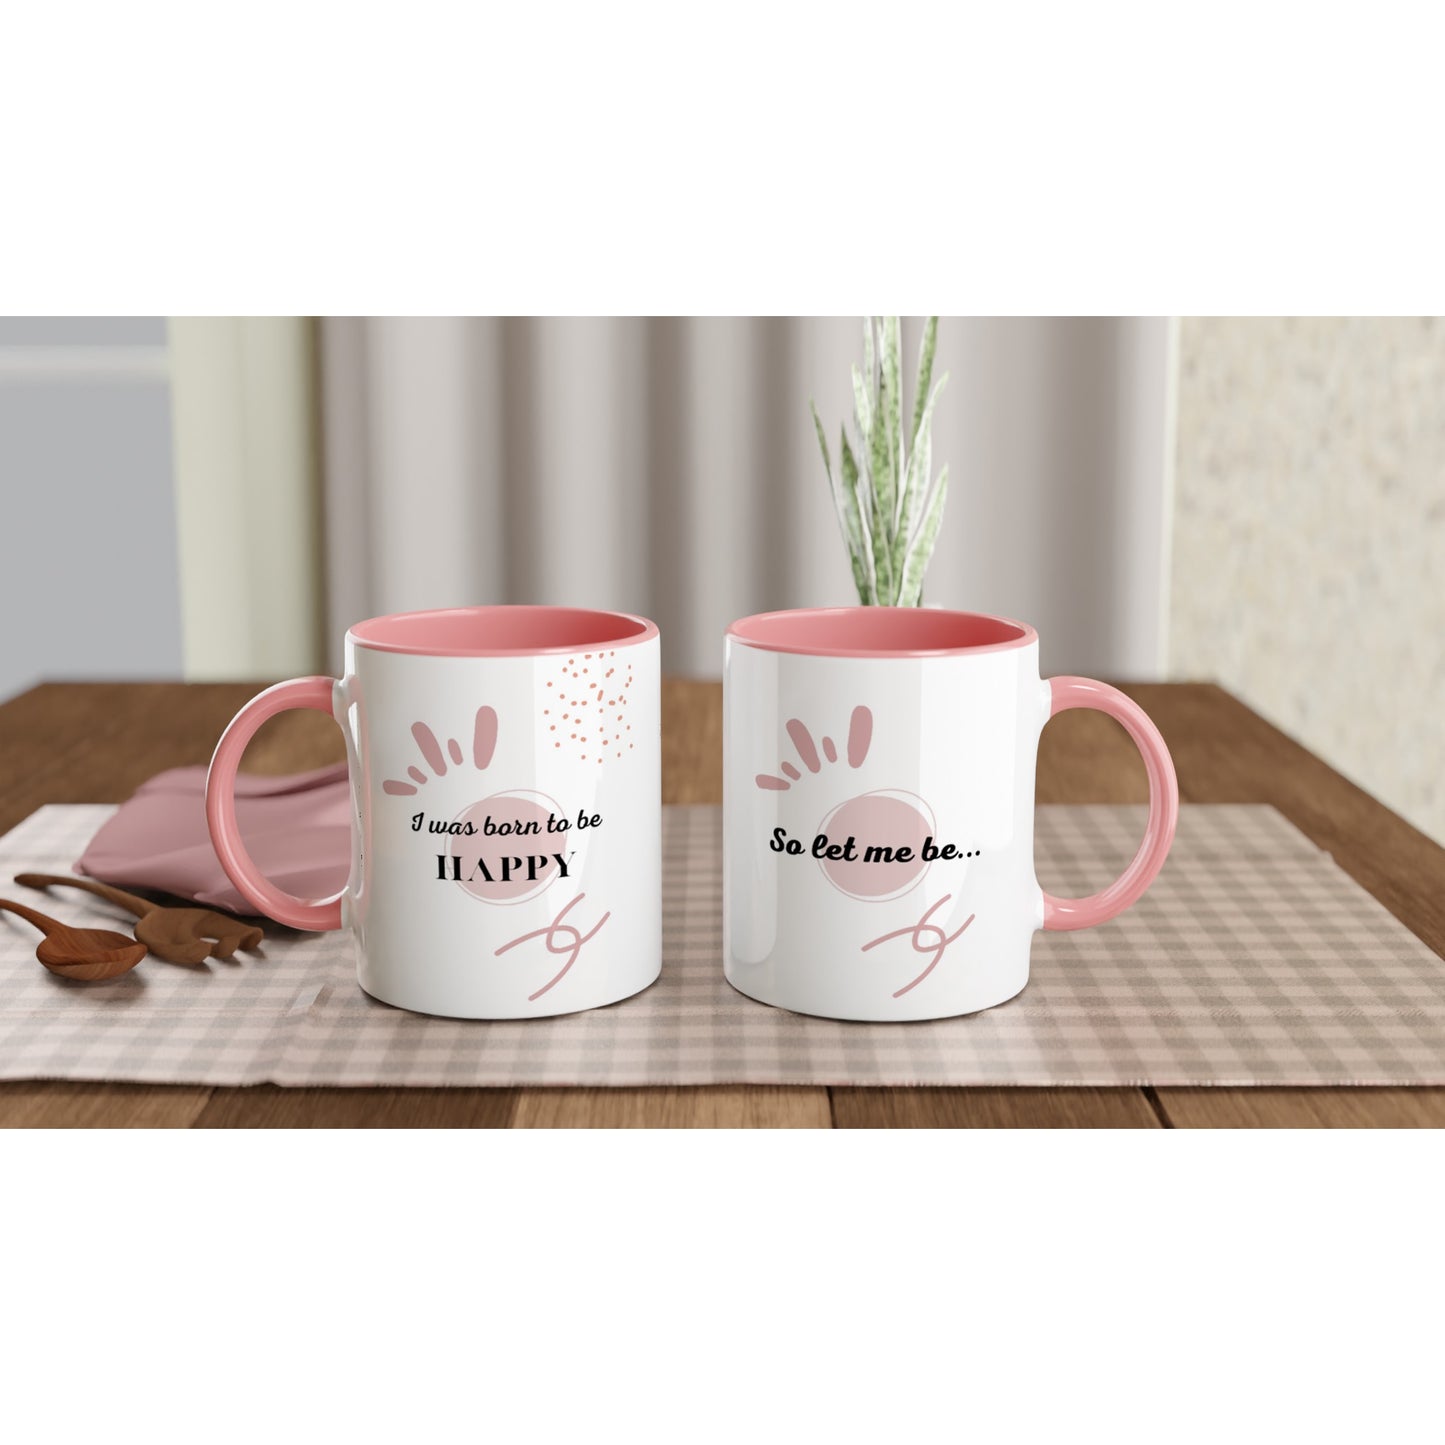 White 11oz Ceramic Mug with Color Inside - '' I was born to be HAPPY, So let me be ''